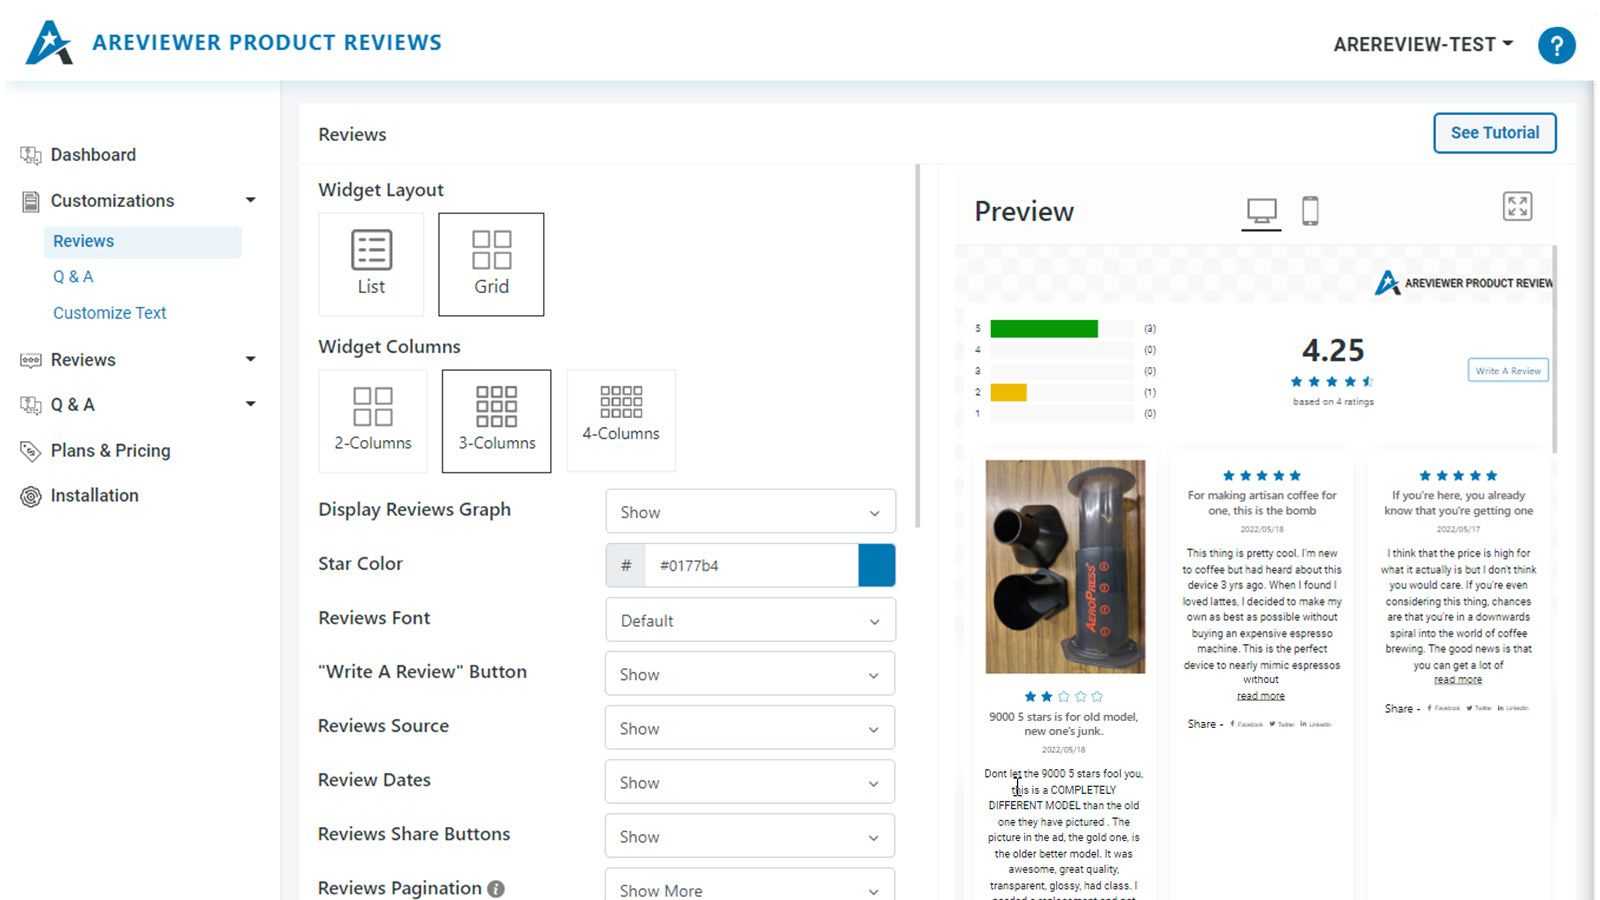 Areviewer Product Reviews - Reviews Customizations